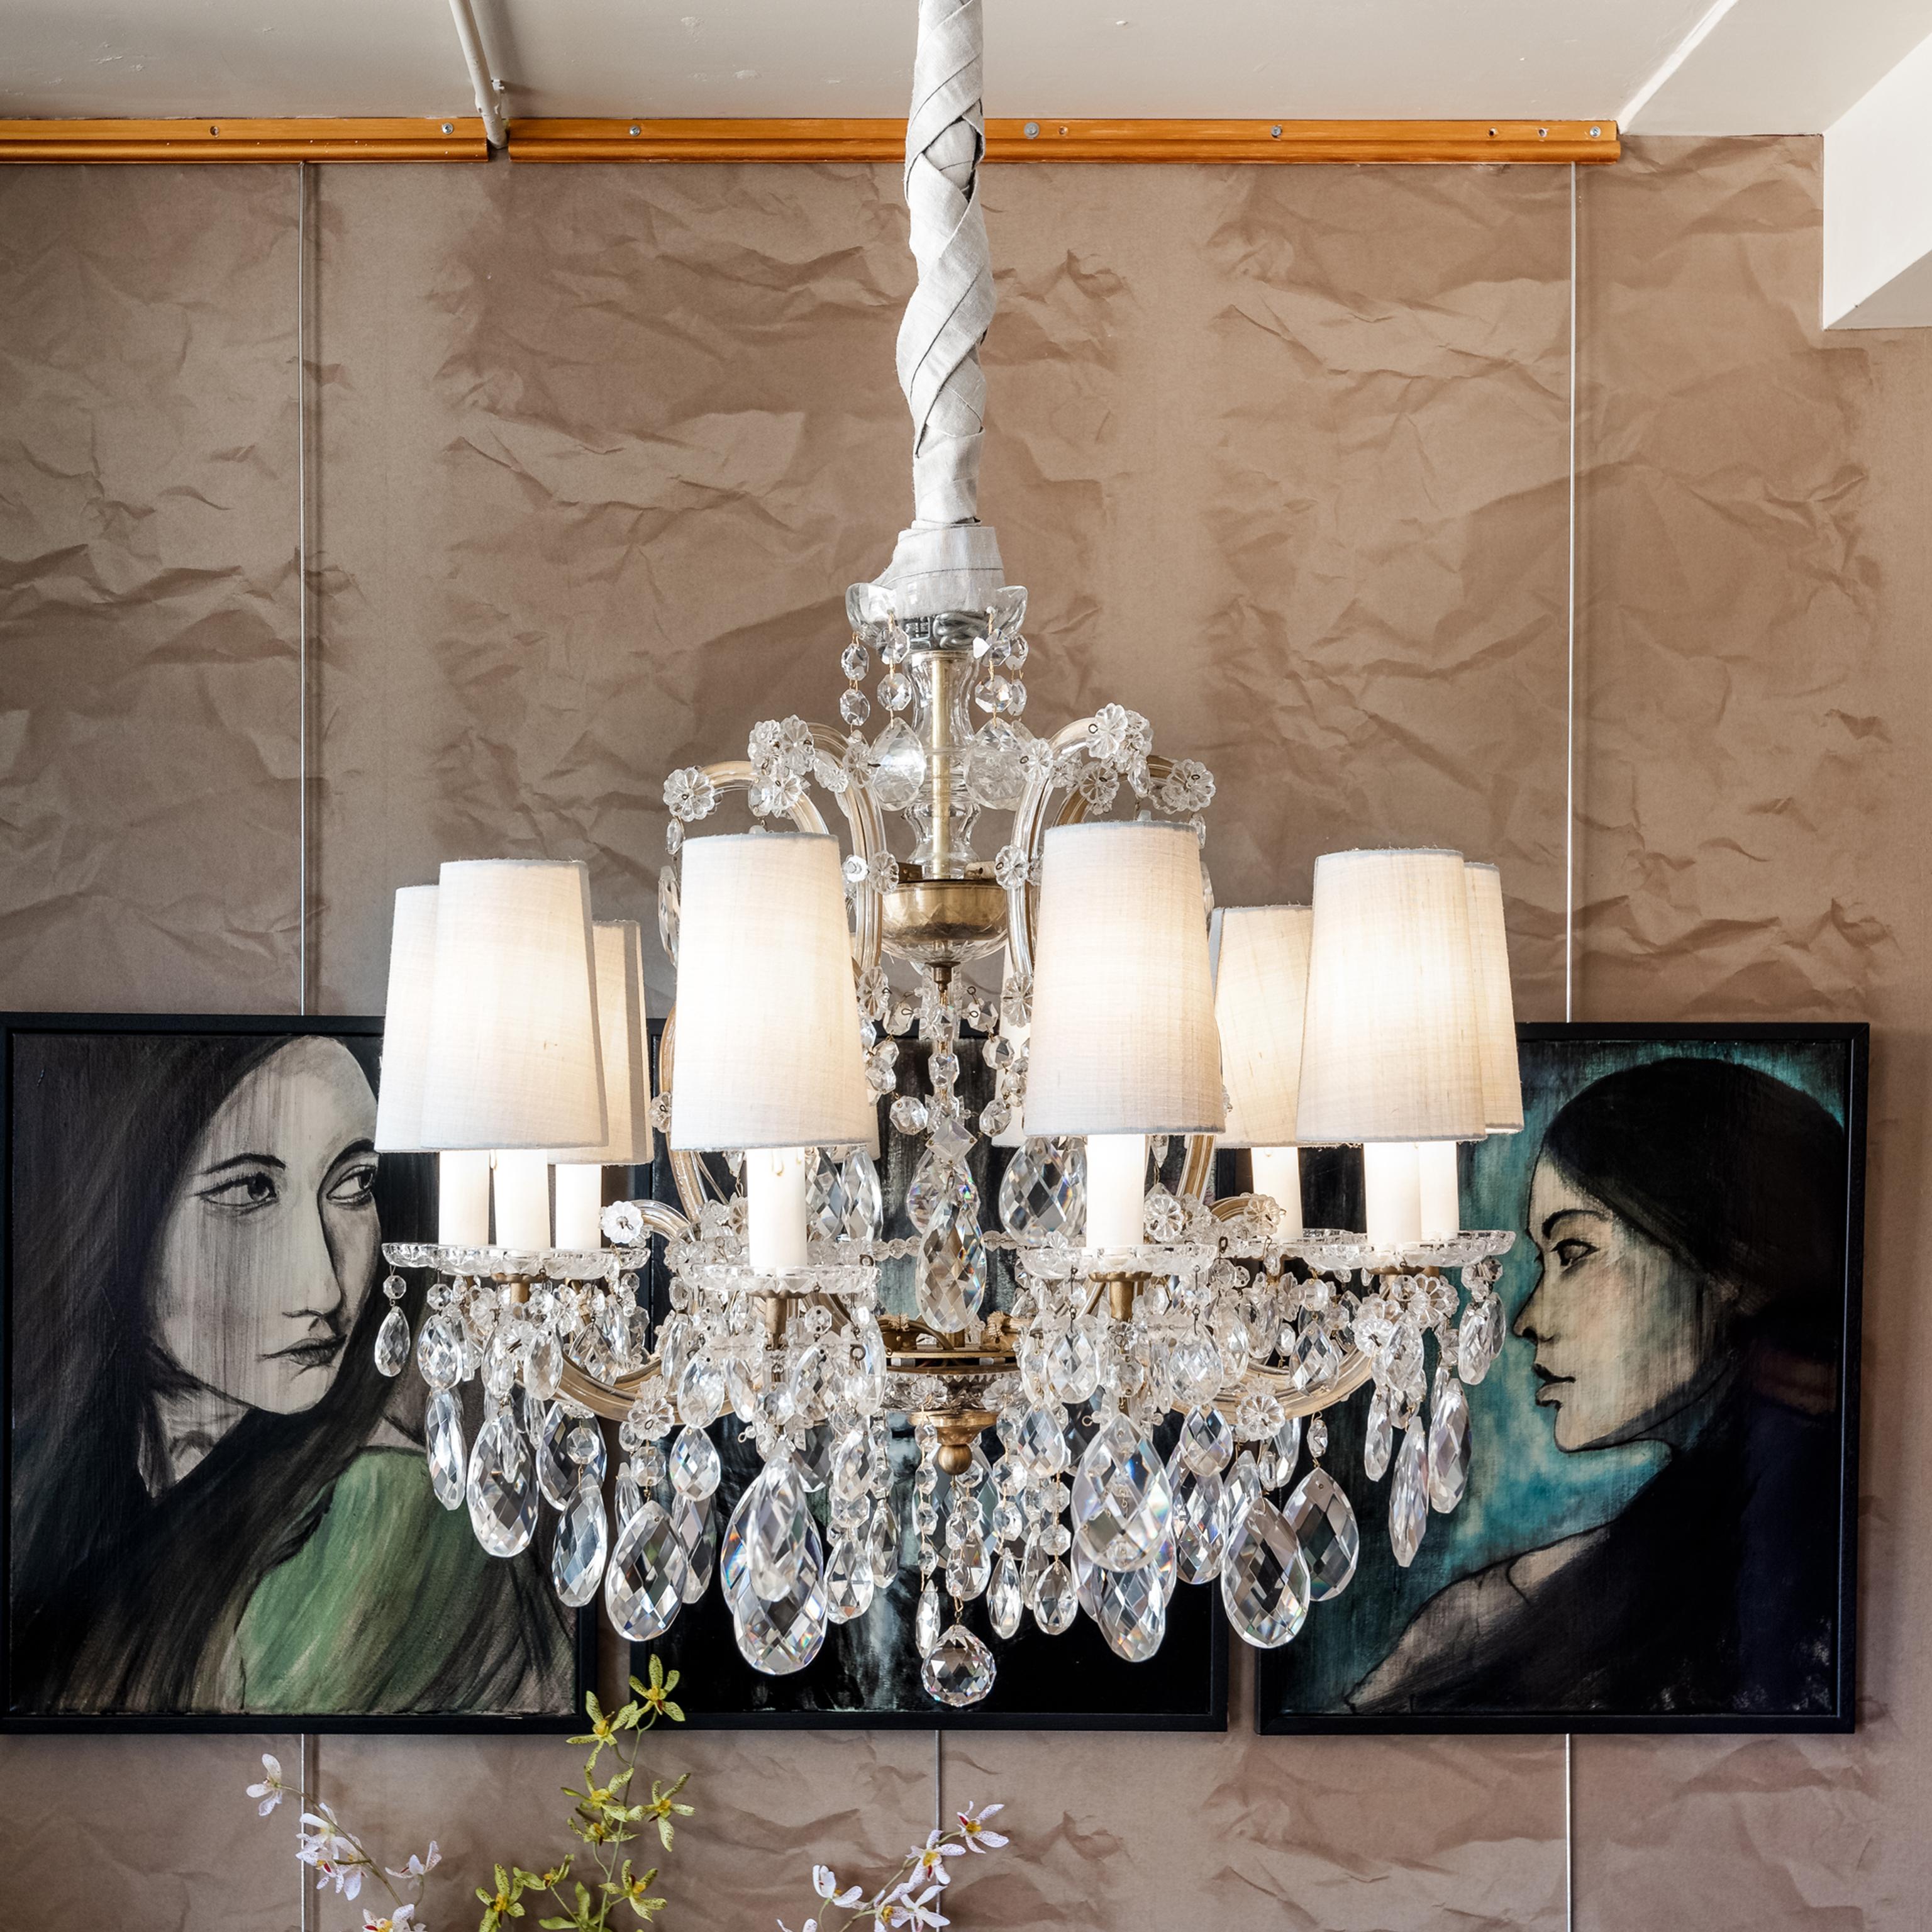 Mid-century French Marie Therese Baccarat tyle 10 Light Crystal Chandelier, 1950's
Beautiful French Marie Therese ten light crystal chandelier. These stunning one-tier chandelier of crystal, cut-crystal and gilt metal featuring ten arms are